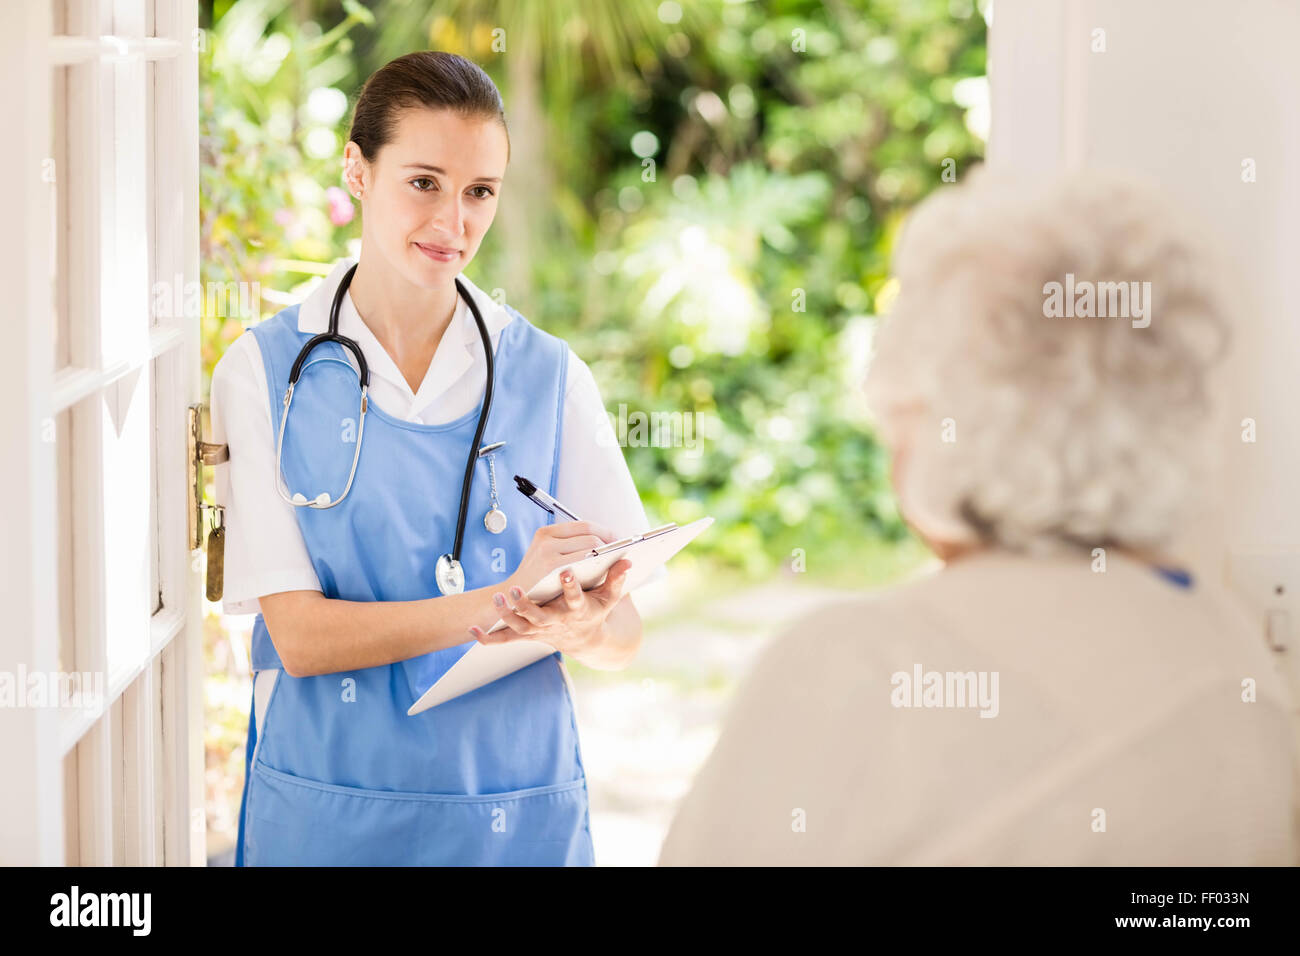 Doctor checking patients health Stock Photo